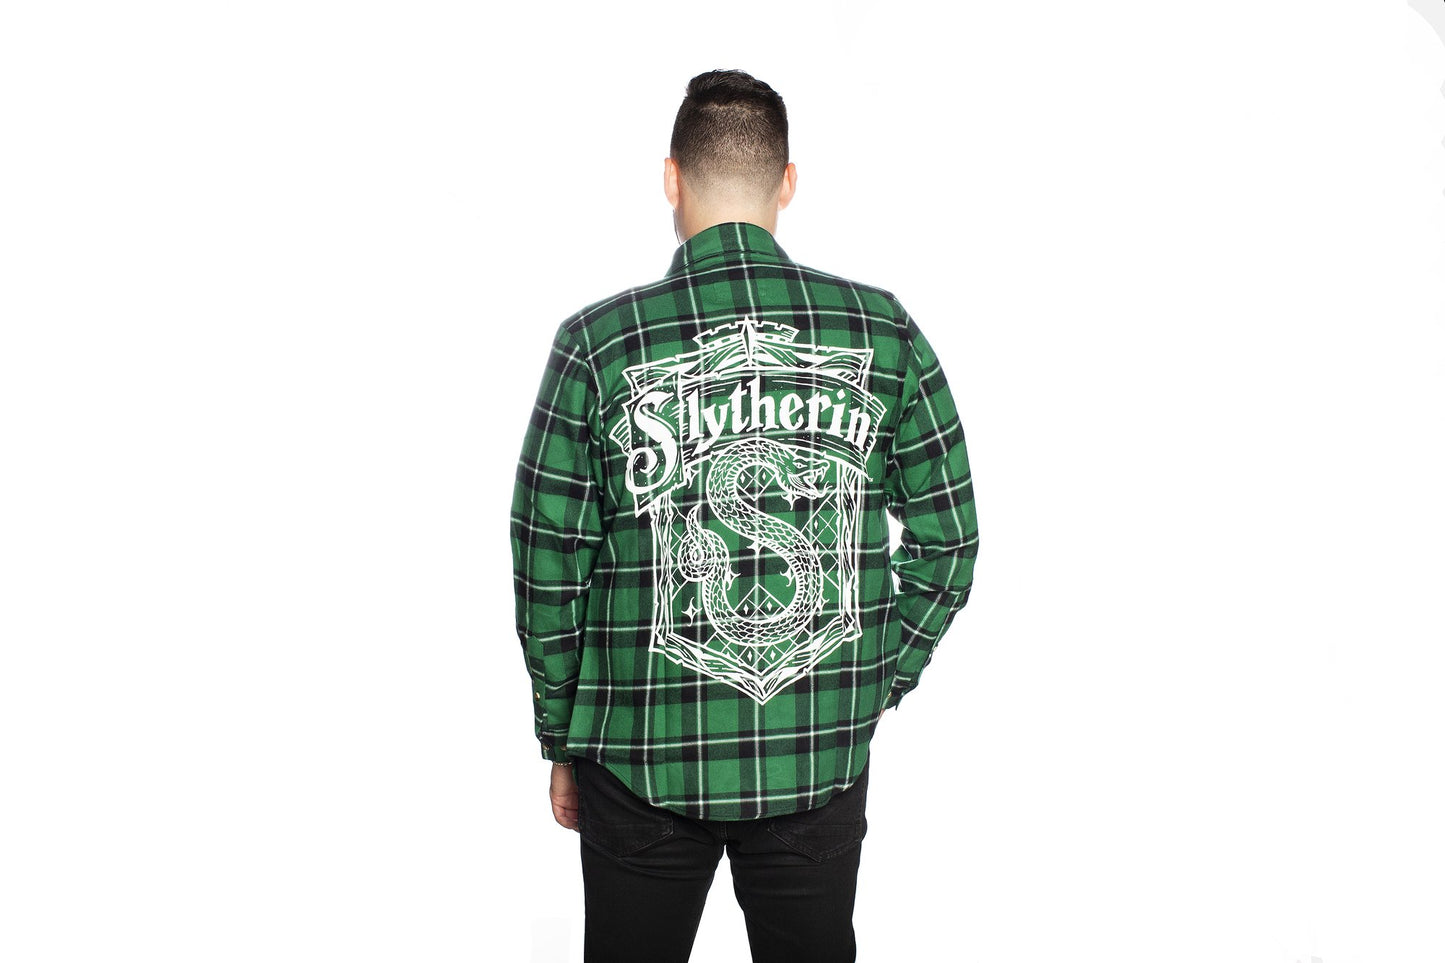 Load image into Gallery viewer, Slytherin House Crest (Harry Potter) Flannel Shirt by Cakeworthy
